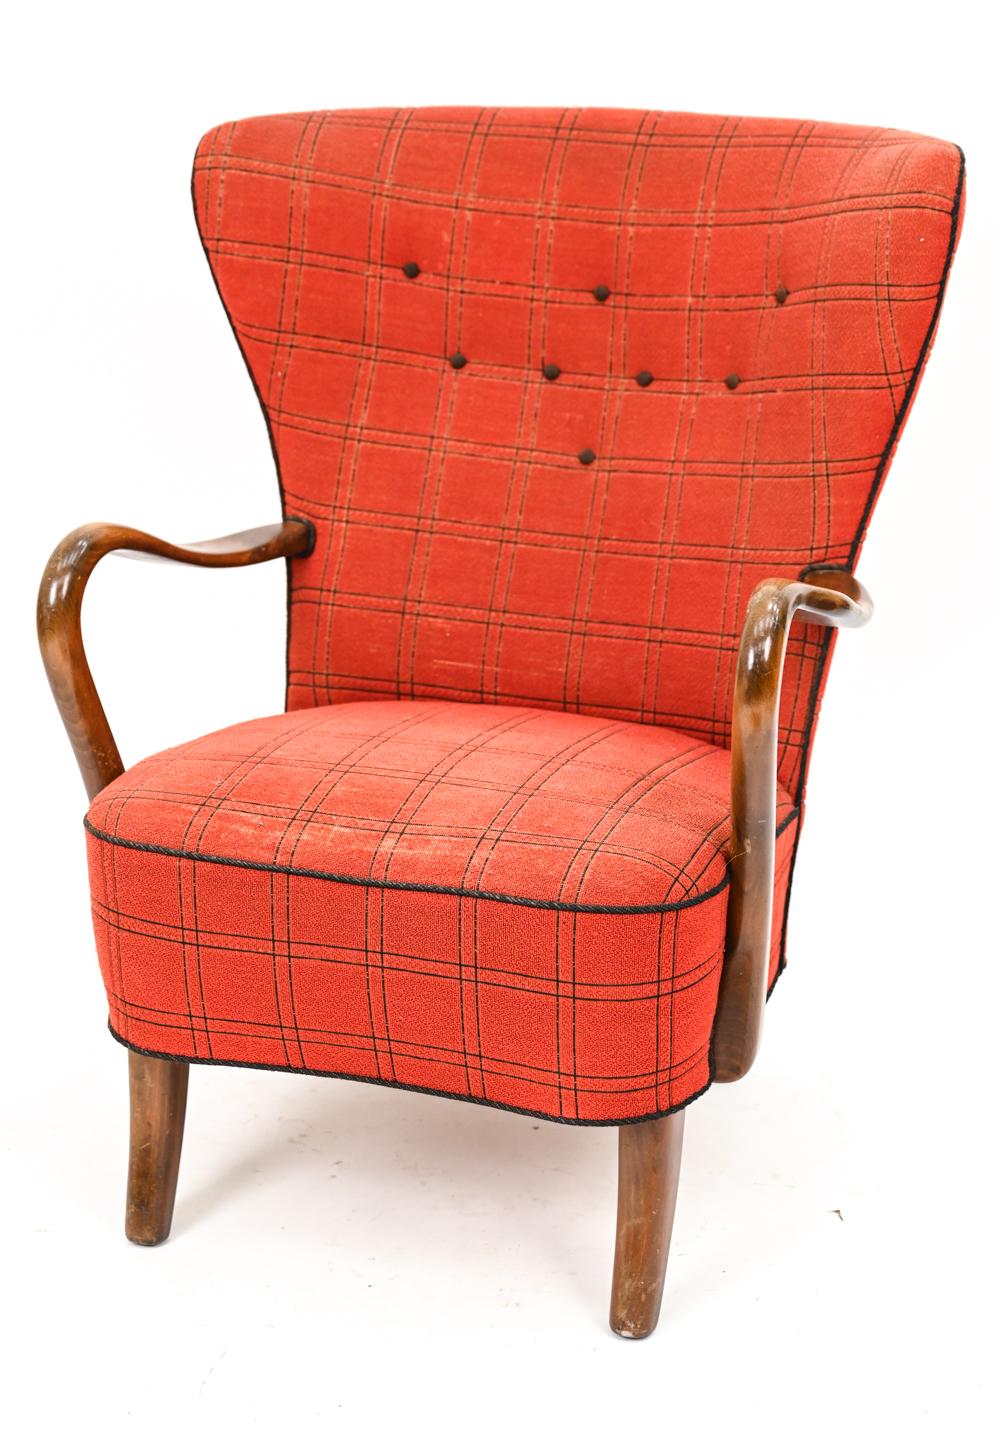 With this handsome chair, Alfred Christensen lends his Scandinavian mid-century sensibilities to offer a modern take on a traditional wingback form. An early example of Danish mid-century design, this transitional chair dates from the 1940's and